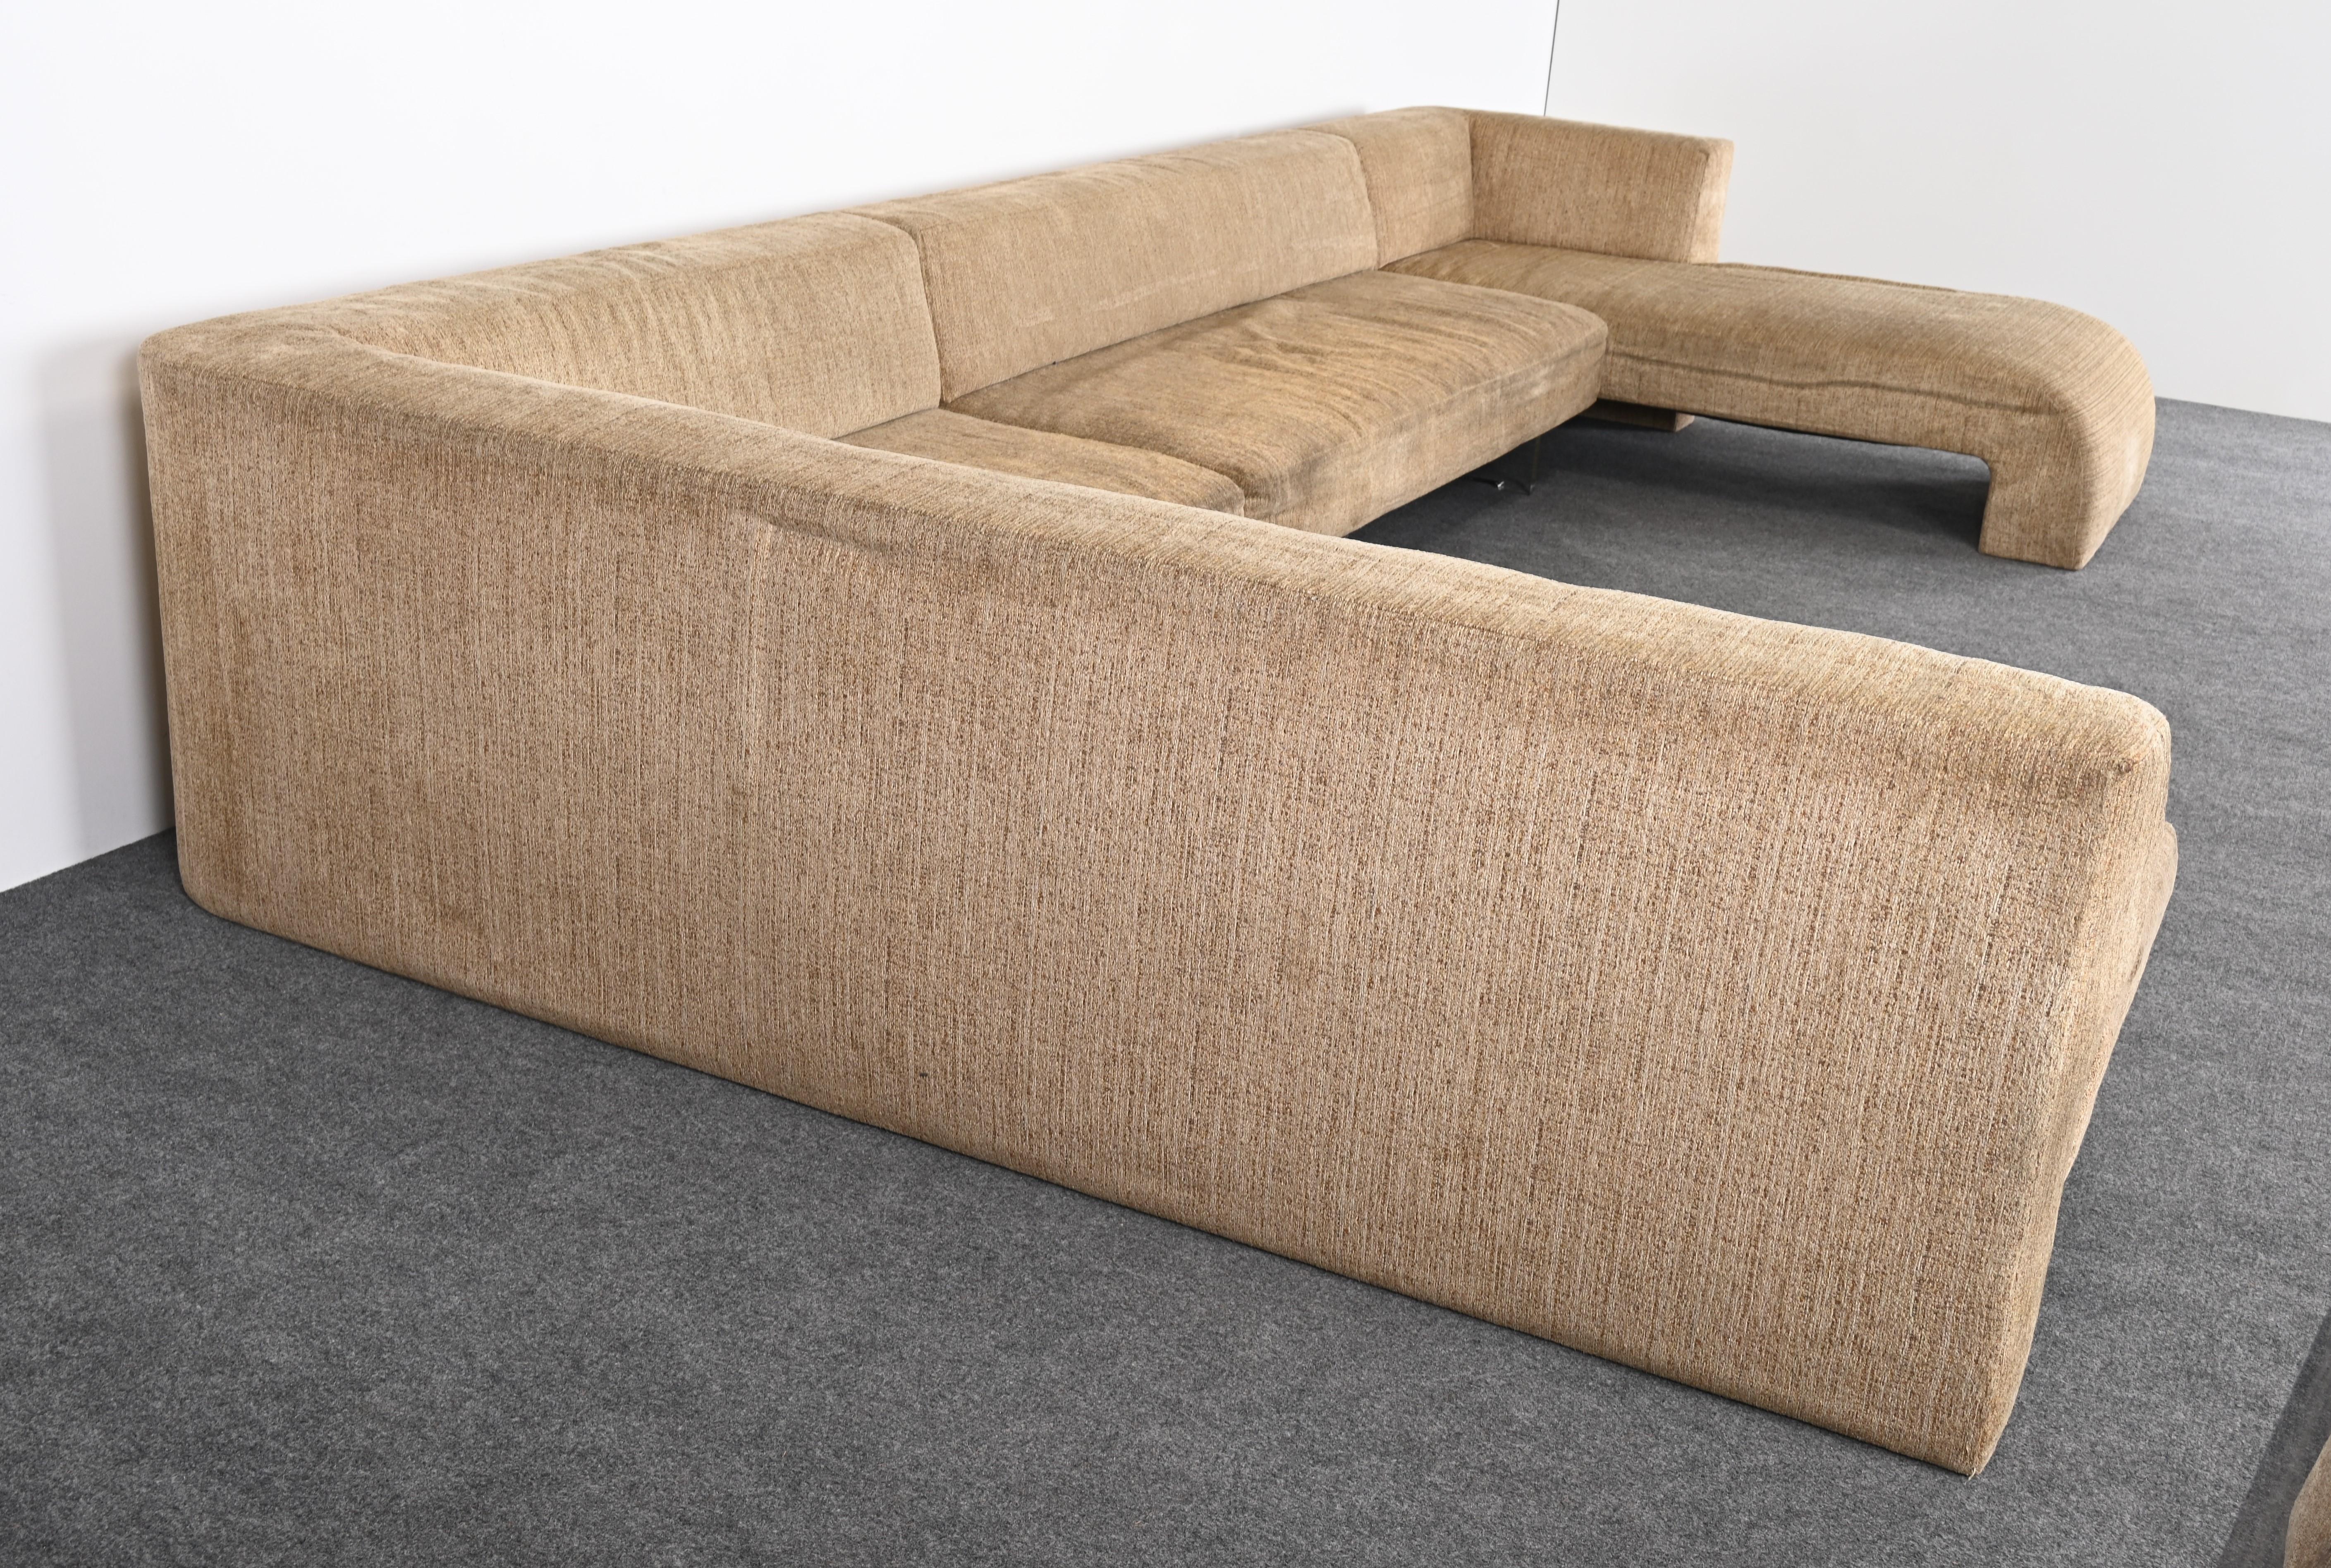 Monumental Sectional Sofa Designed by Vladimir Kagan, 1970s For Sale 8